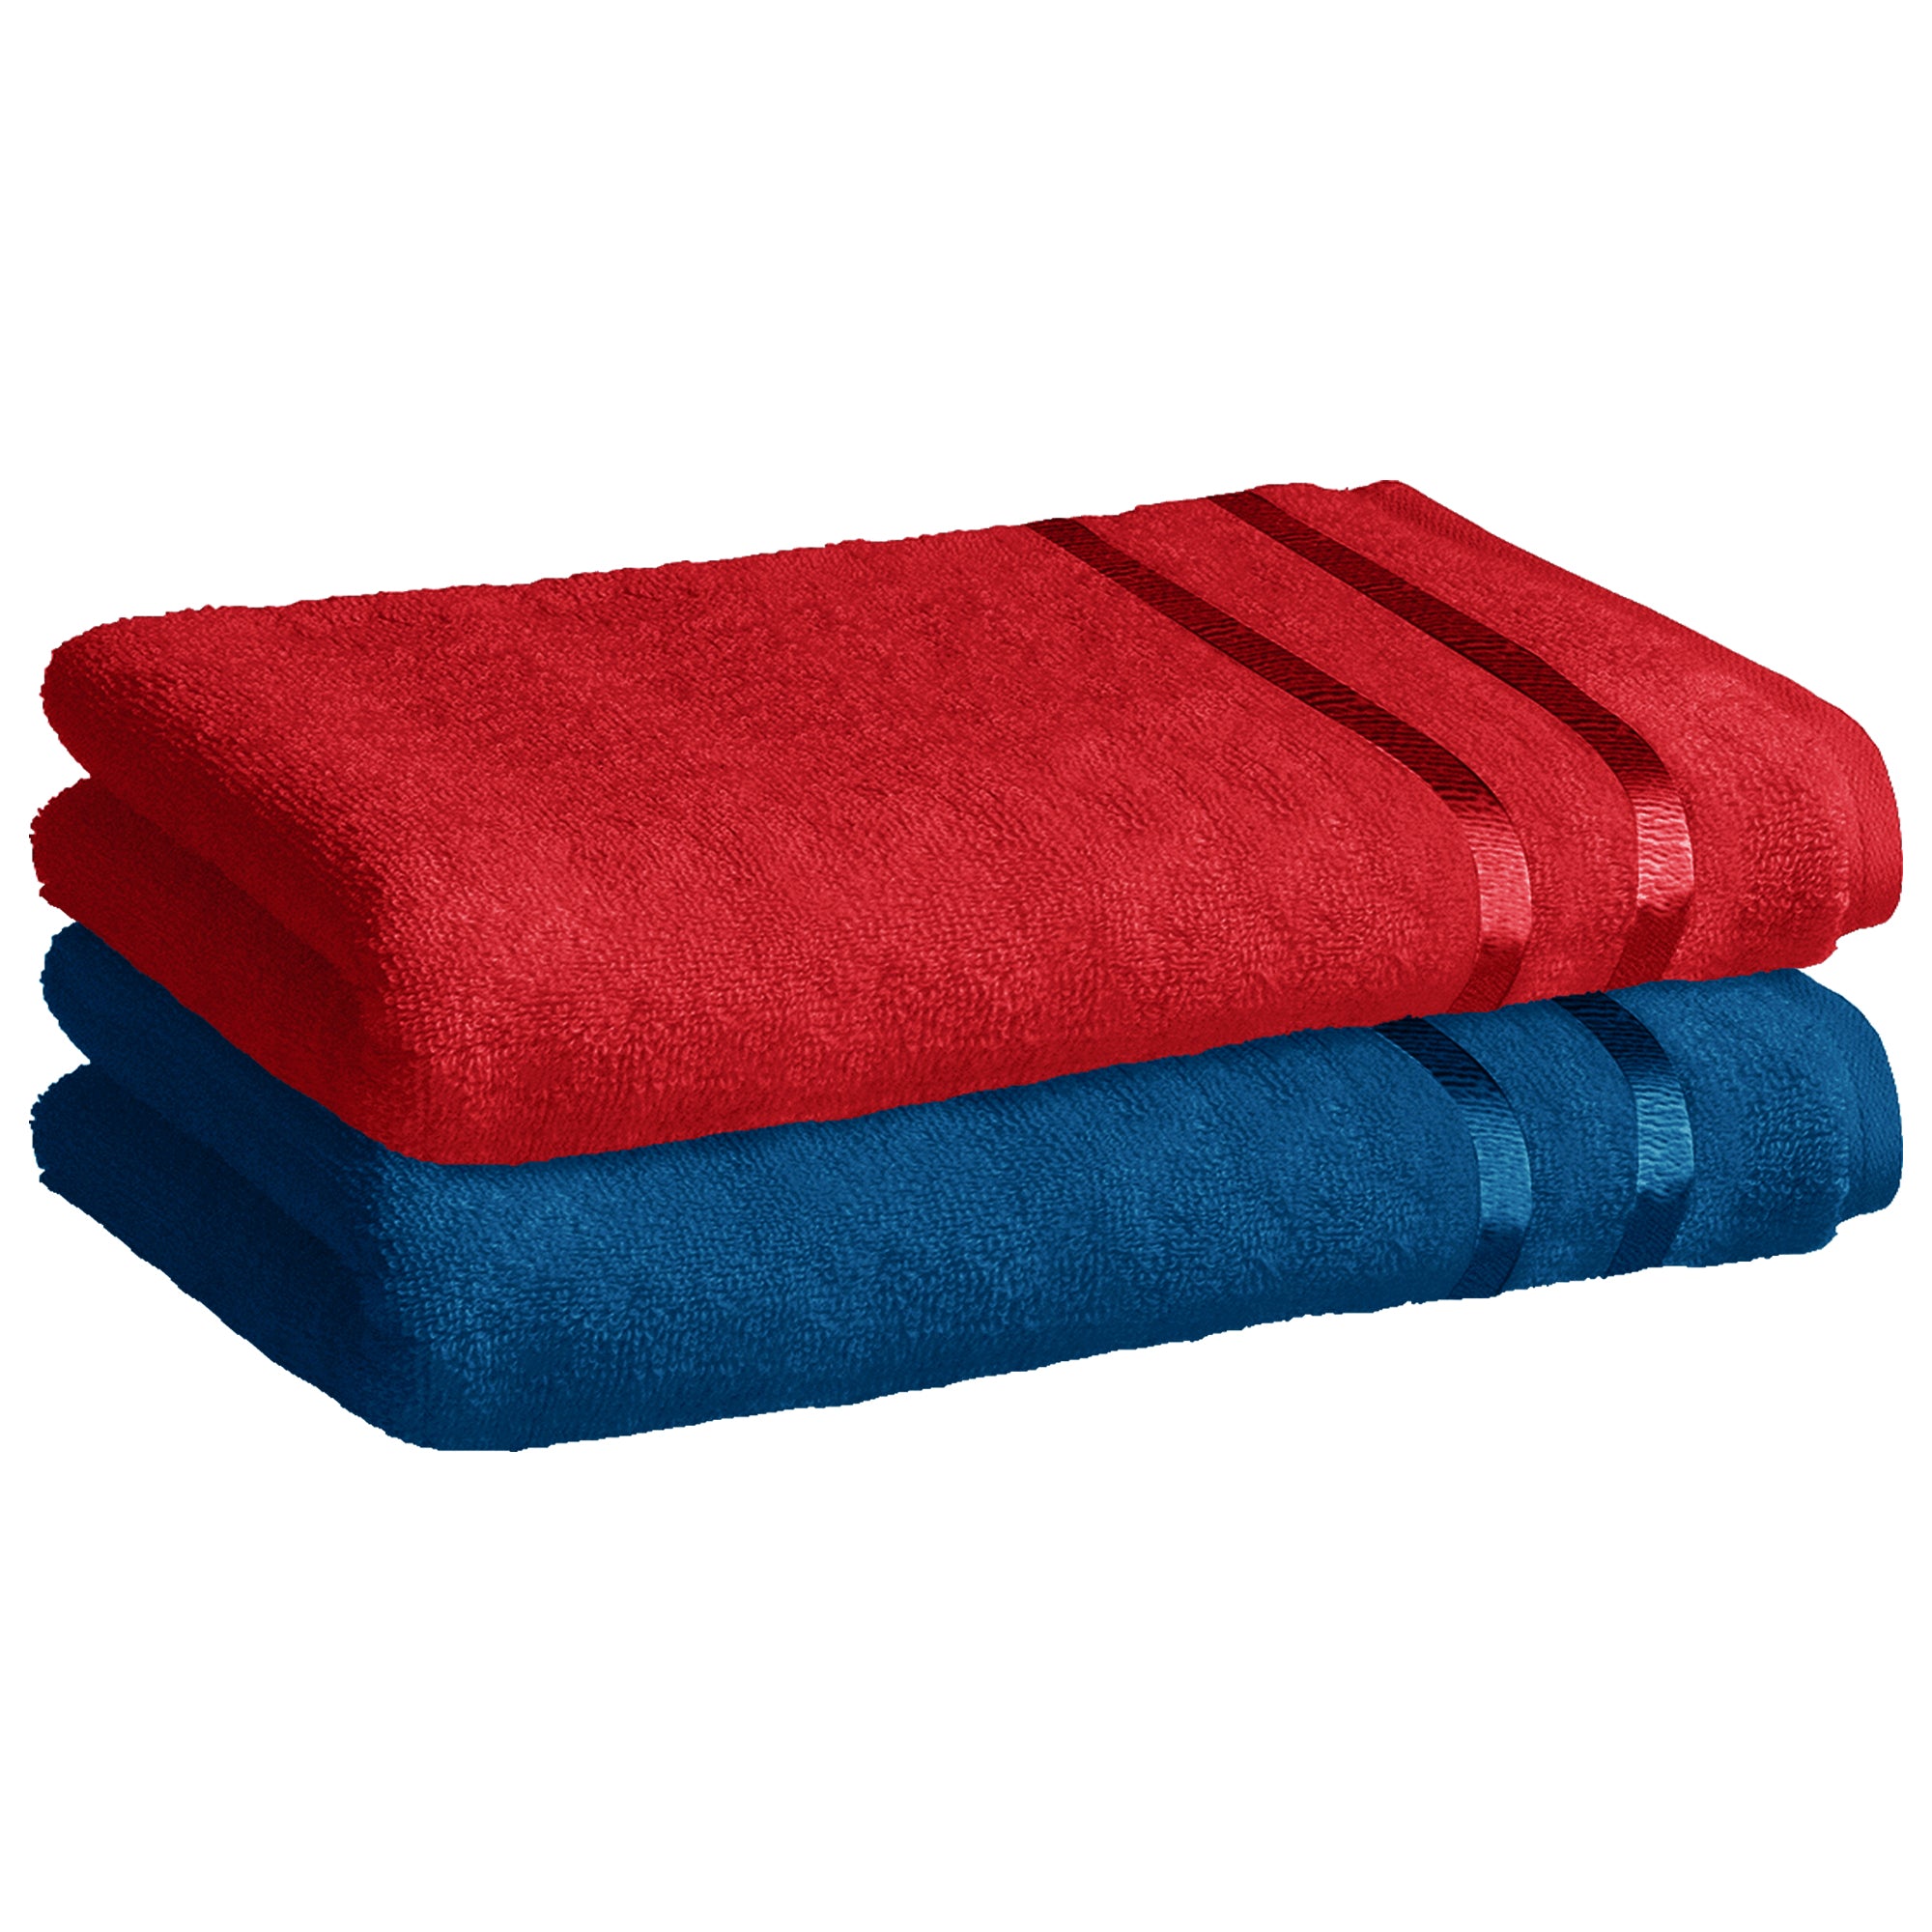 Story@Home 2 Units 100% Cotton Ladies Bath Towels - Navy and Wine Red